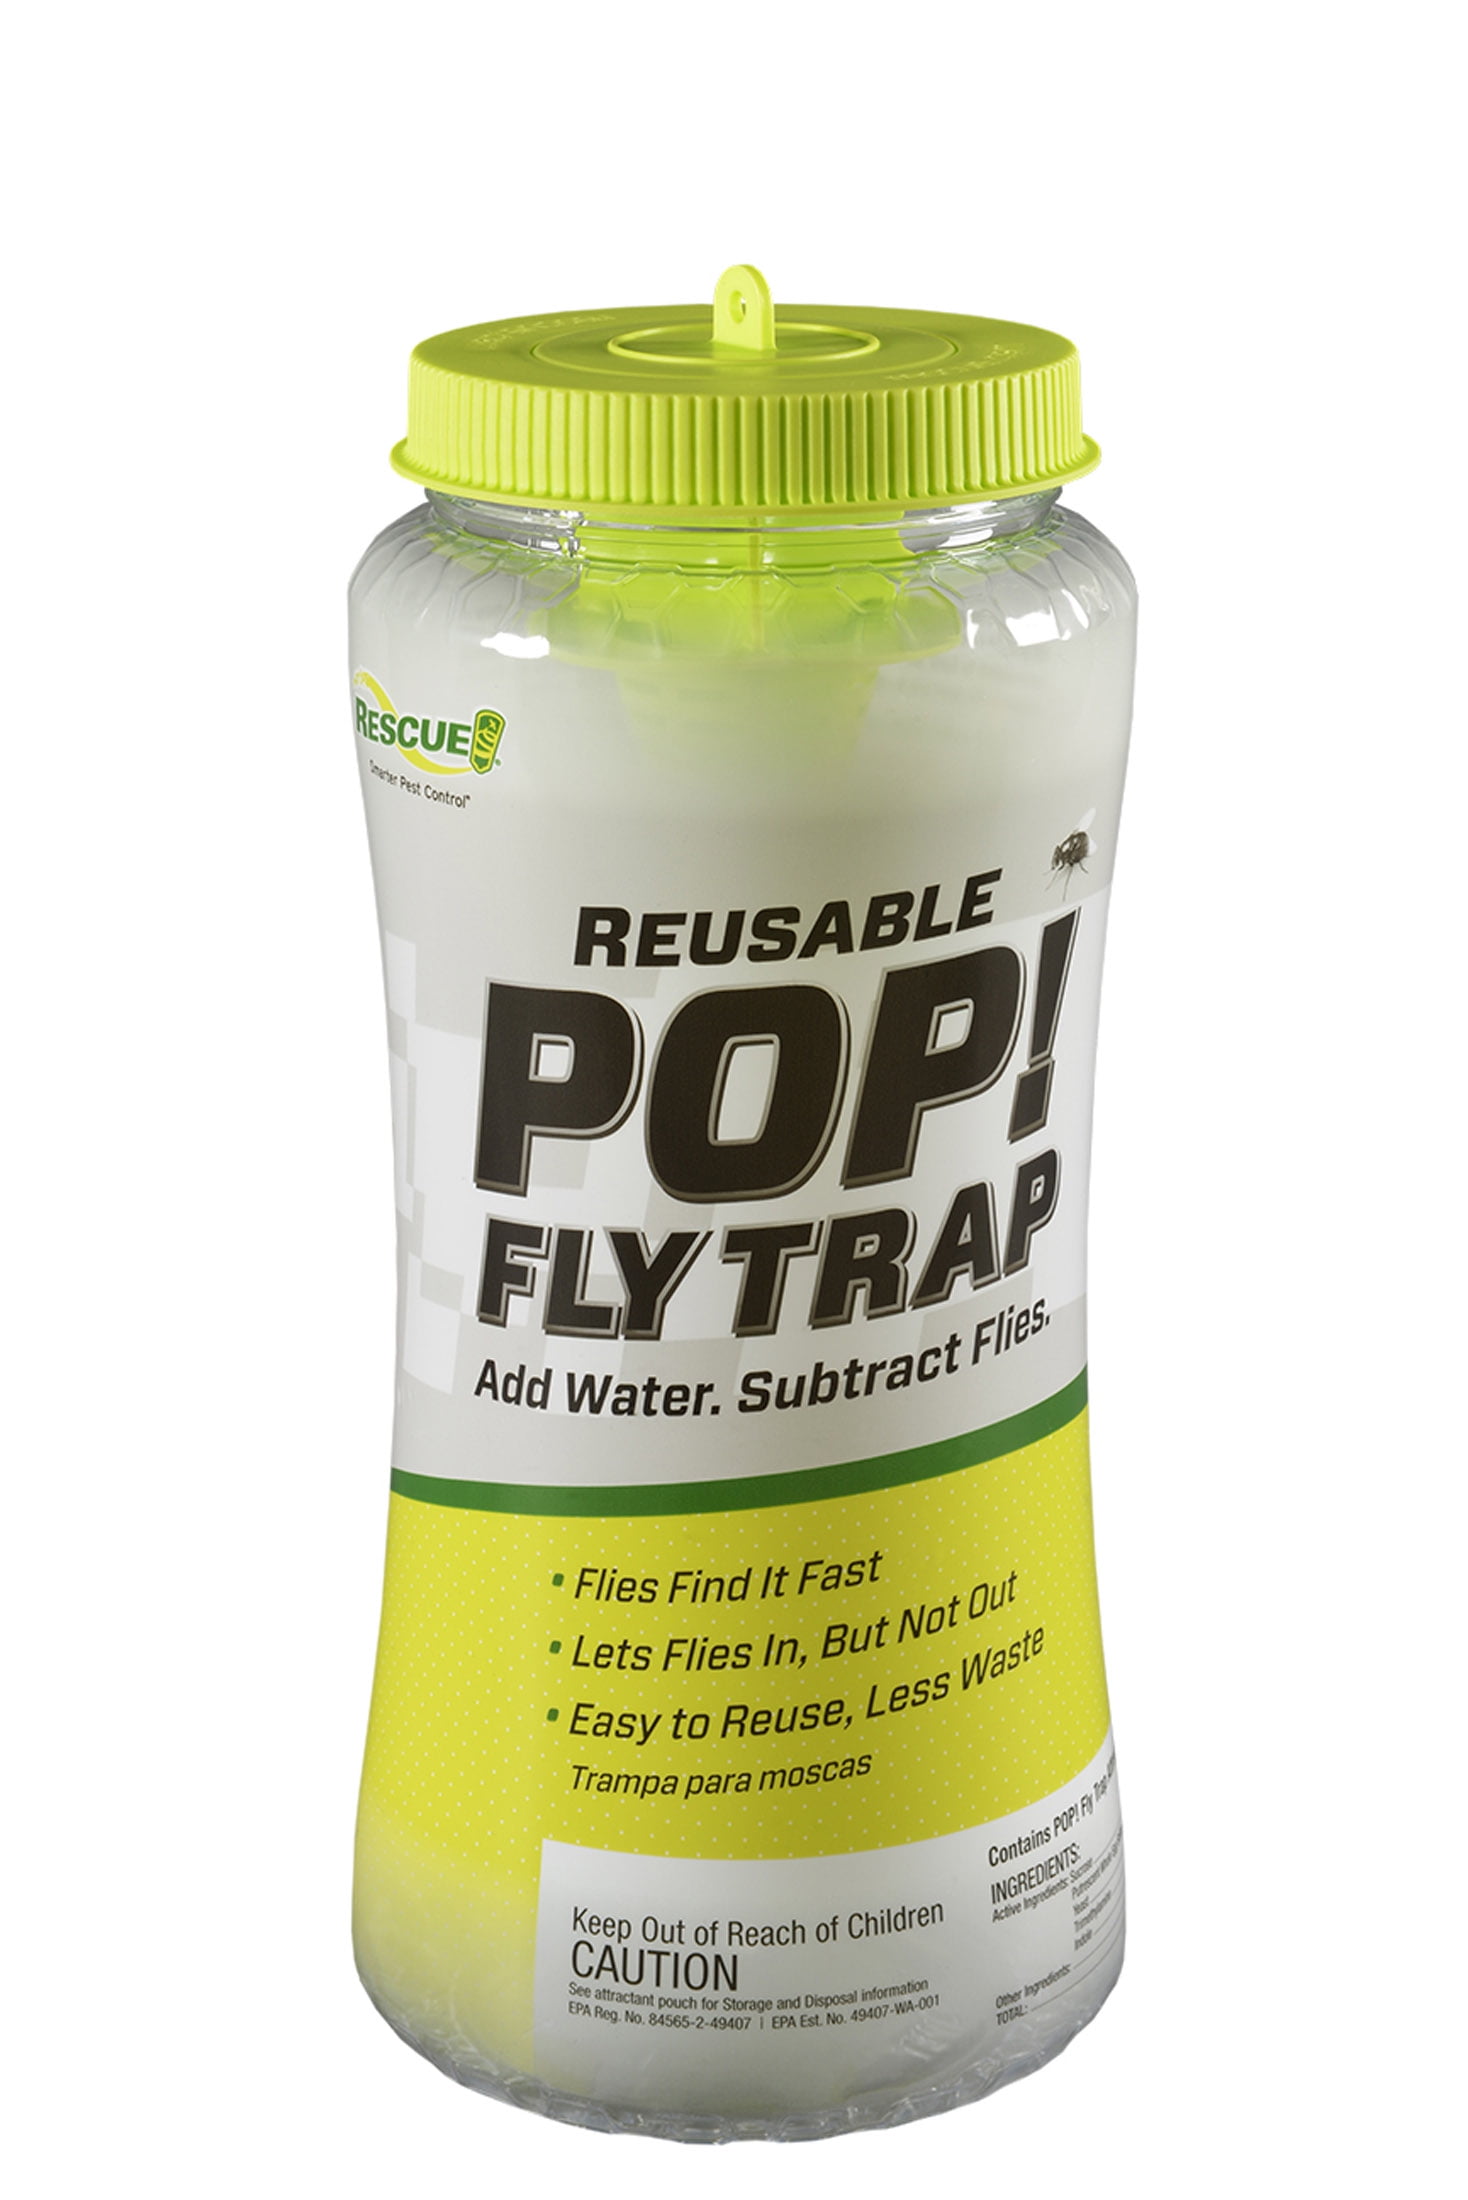 RESCUE! Pop! Reusable Outdoor Fly Trap, 1 Pack